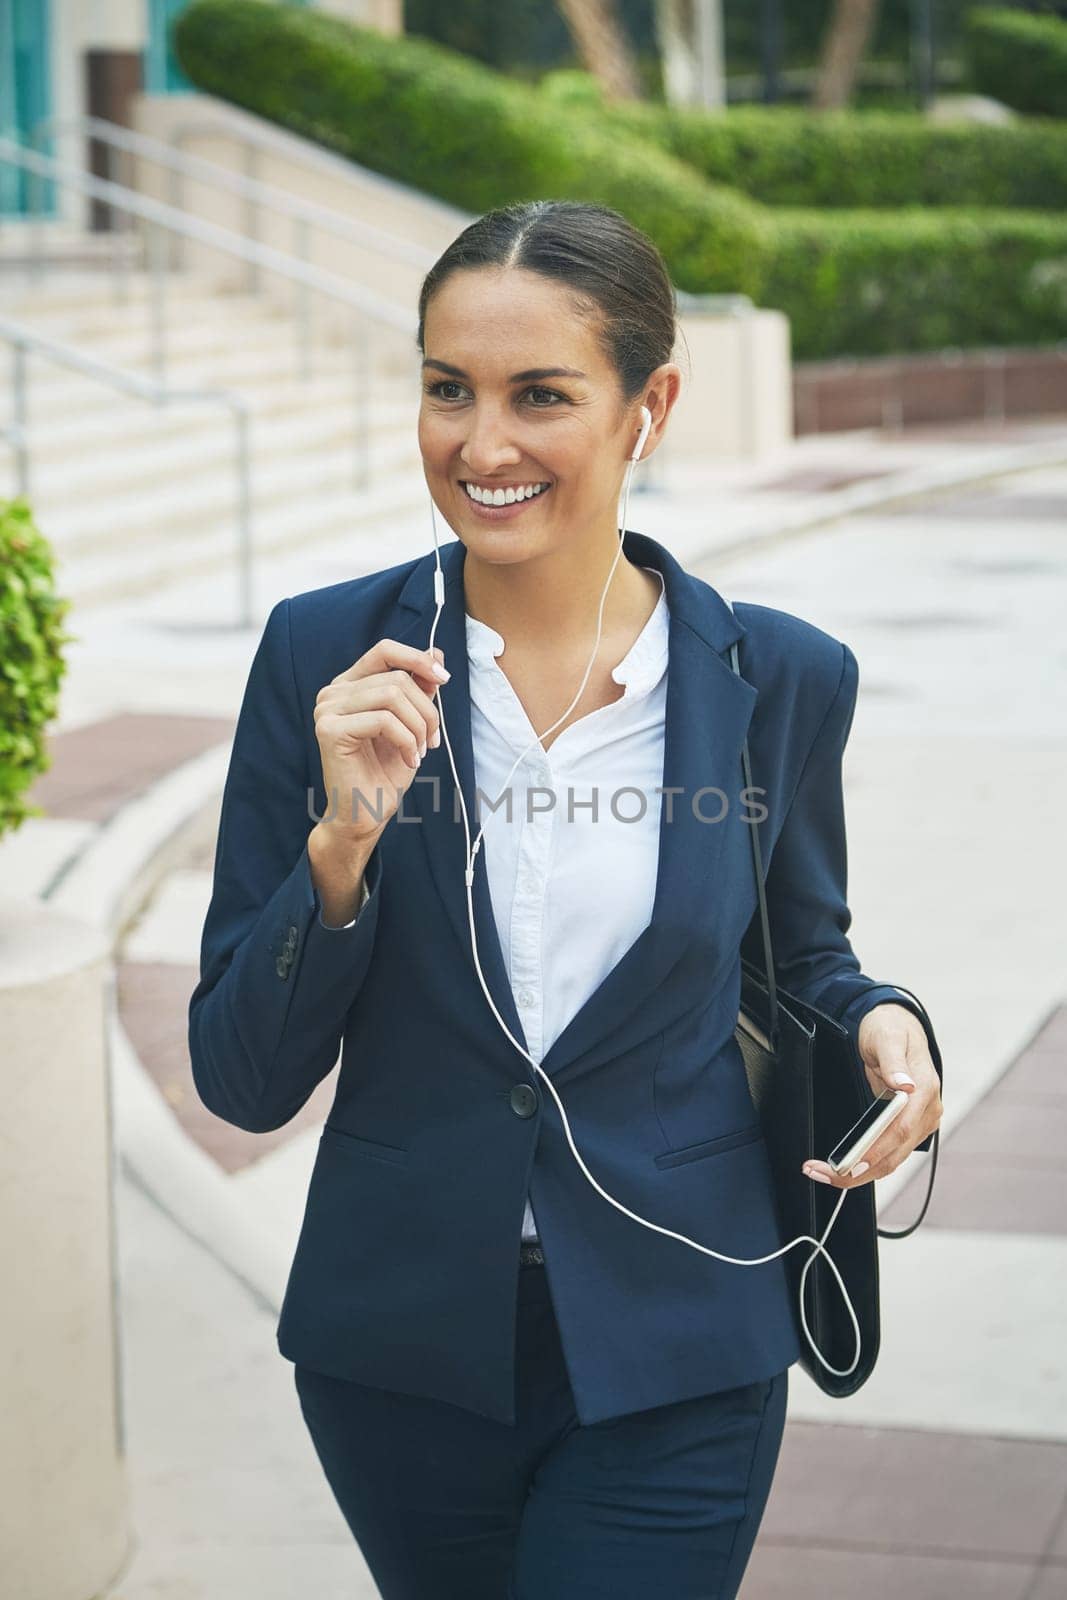 Handsfree communication for a busy woman on the move. a young businesswoman her phone and earphones while out in the city